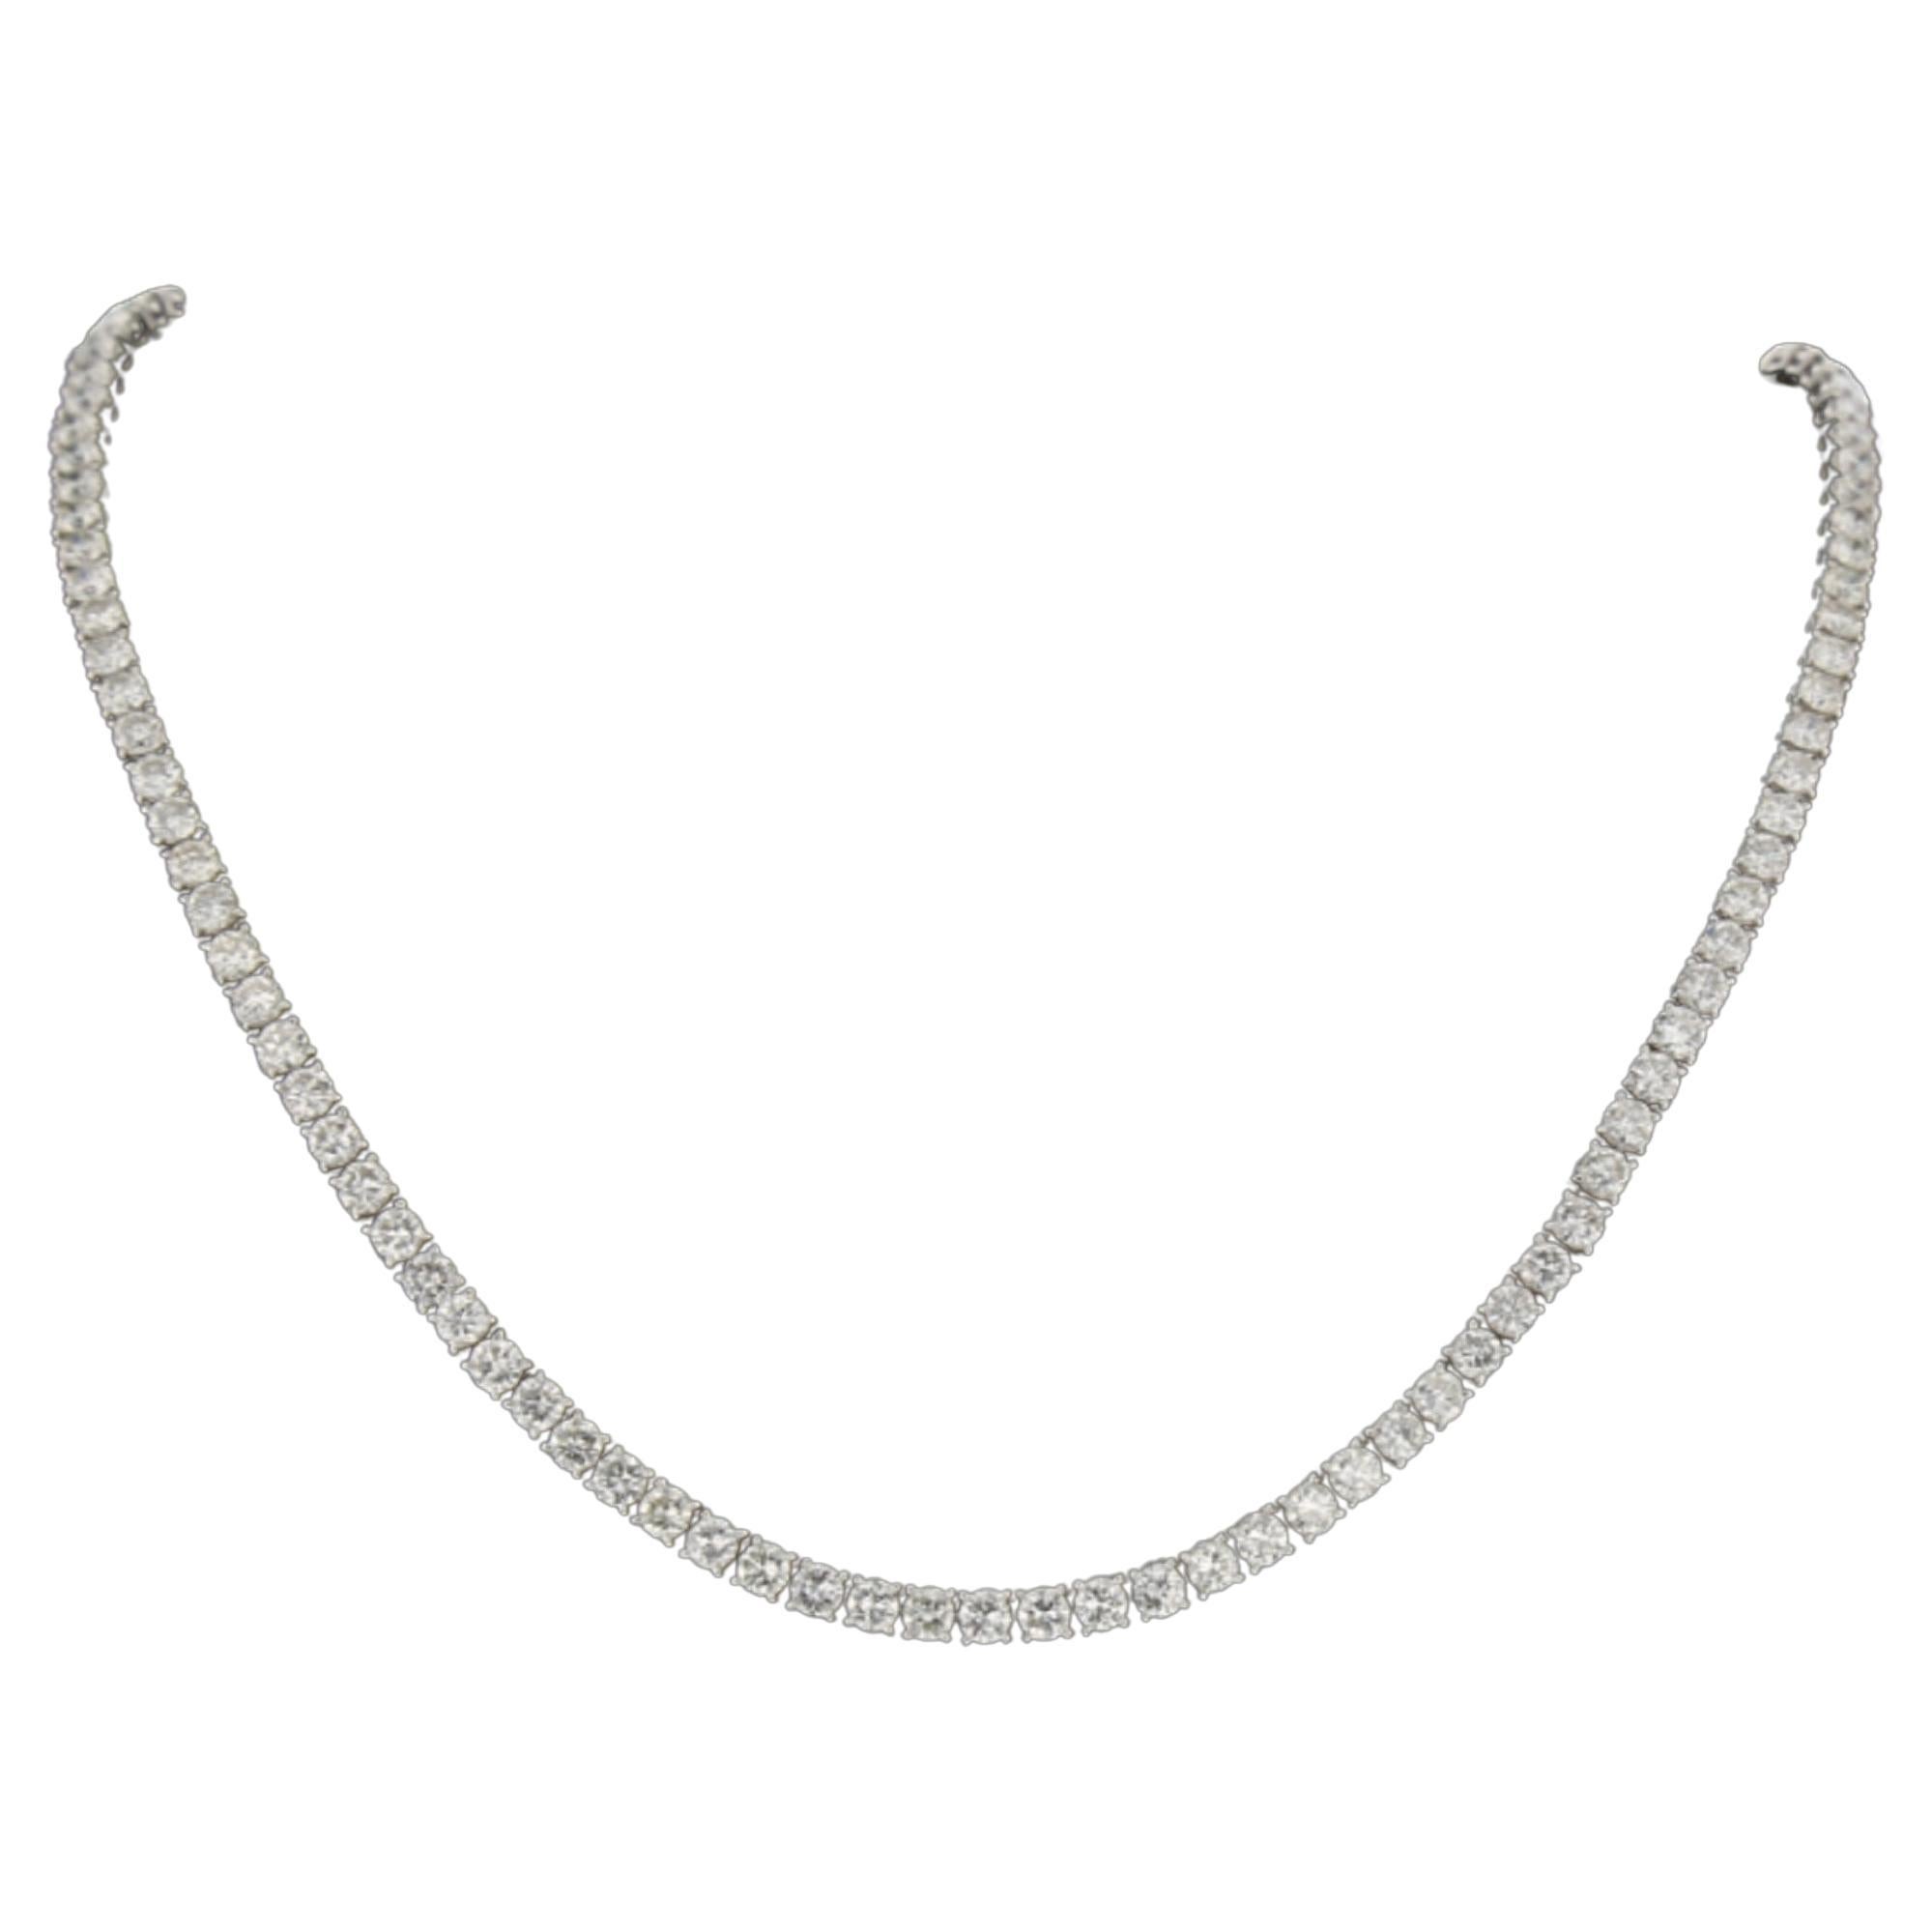 17.53 ct - HRD Certified Diamond Tennis Necklace
18k White Gold 15 Pointer (G-H Color VS) (50% Diamonds) Tennis Necklace with HRD Certificate